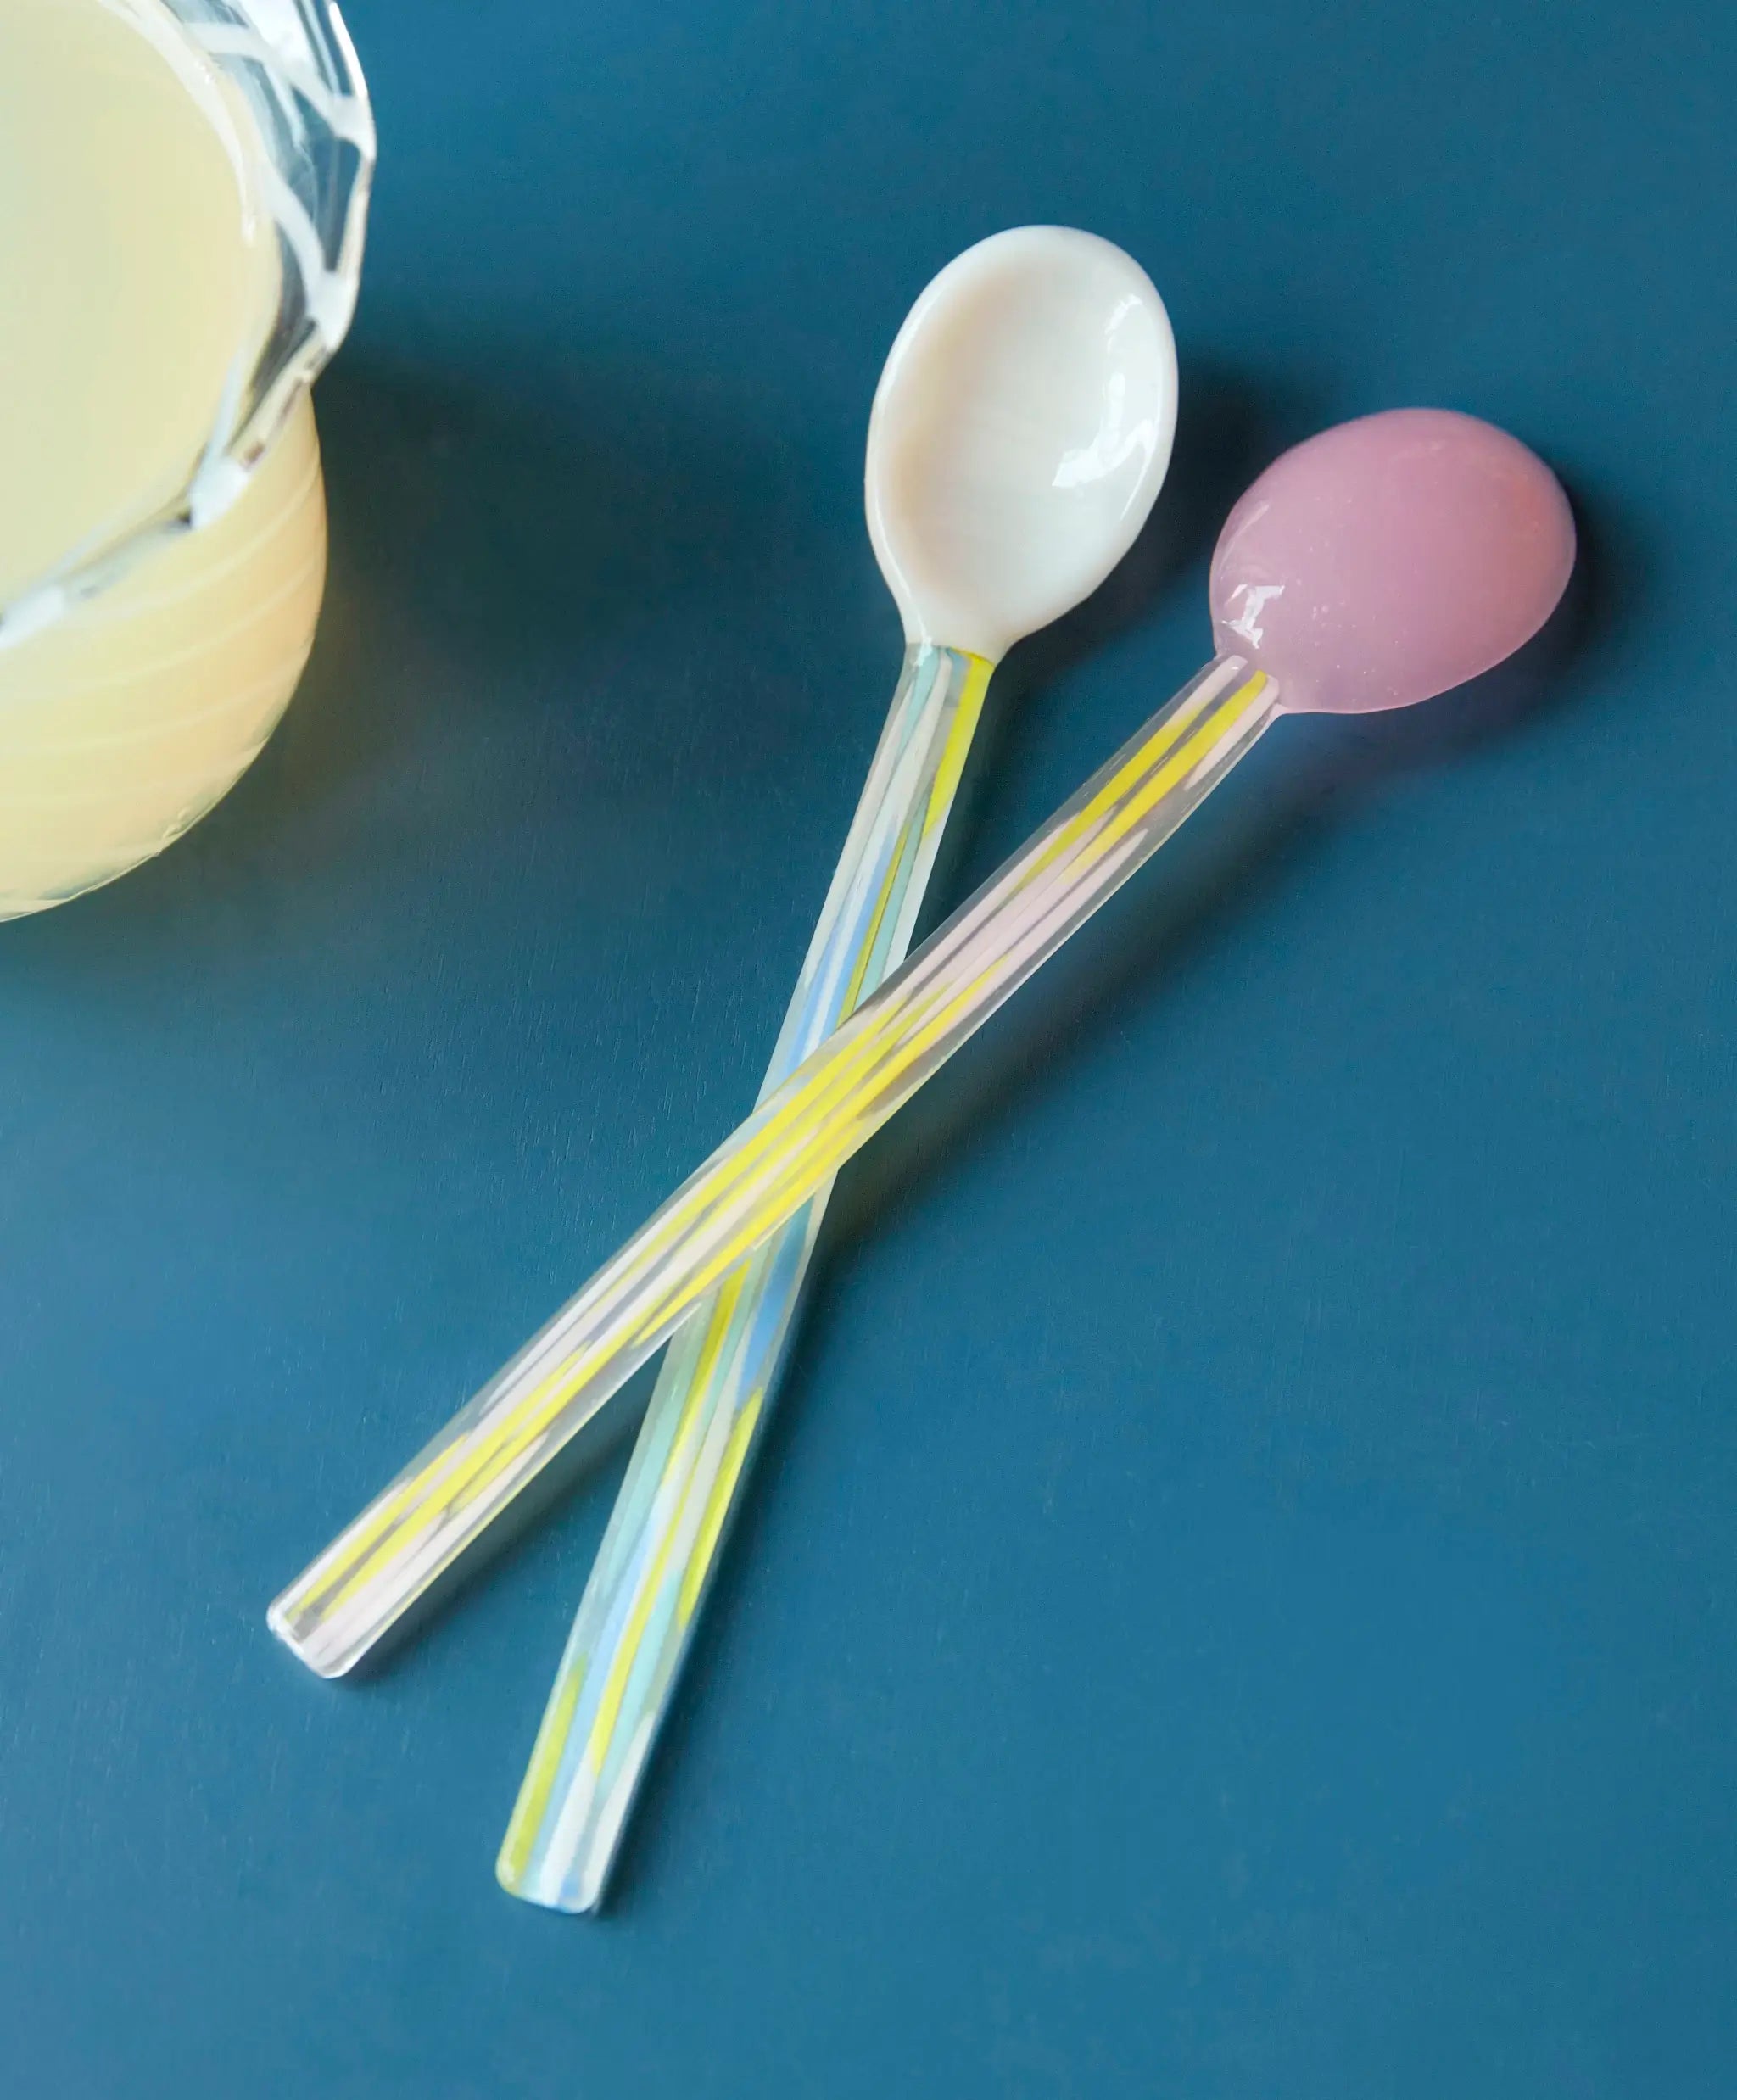 Glass Spoons - 'Flat' Set of 2 | White, Light Pink | by HAY - Lifestory